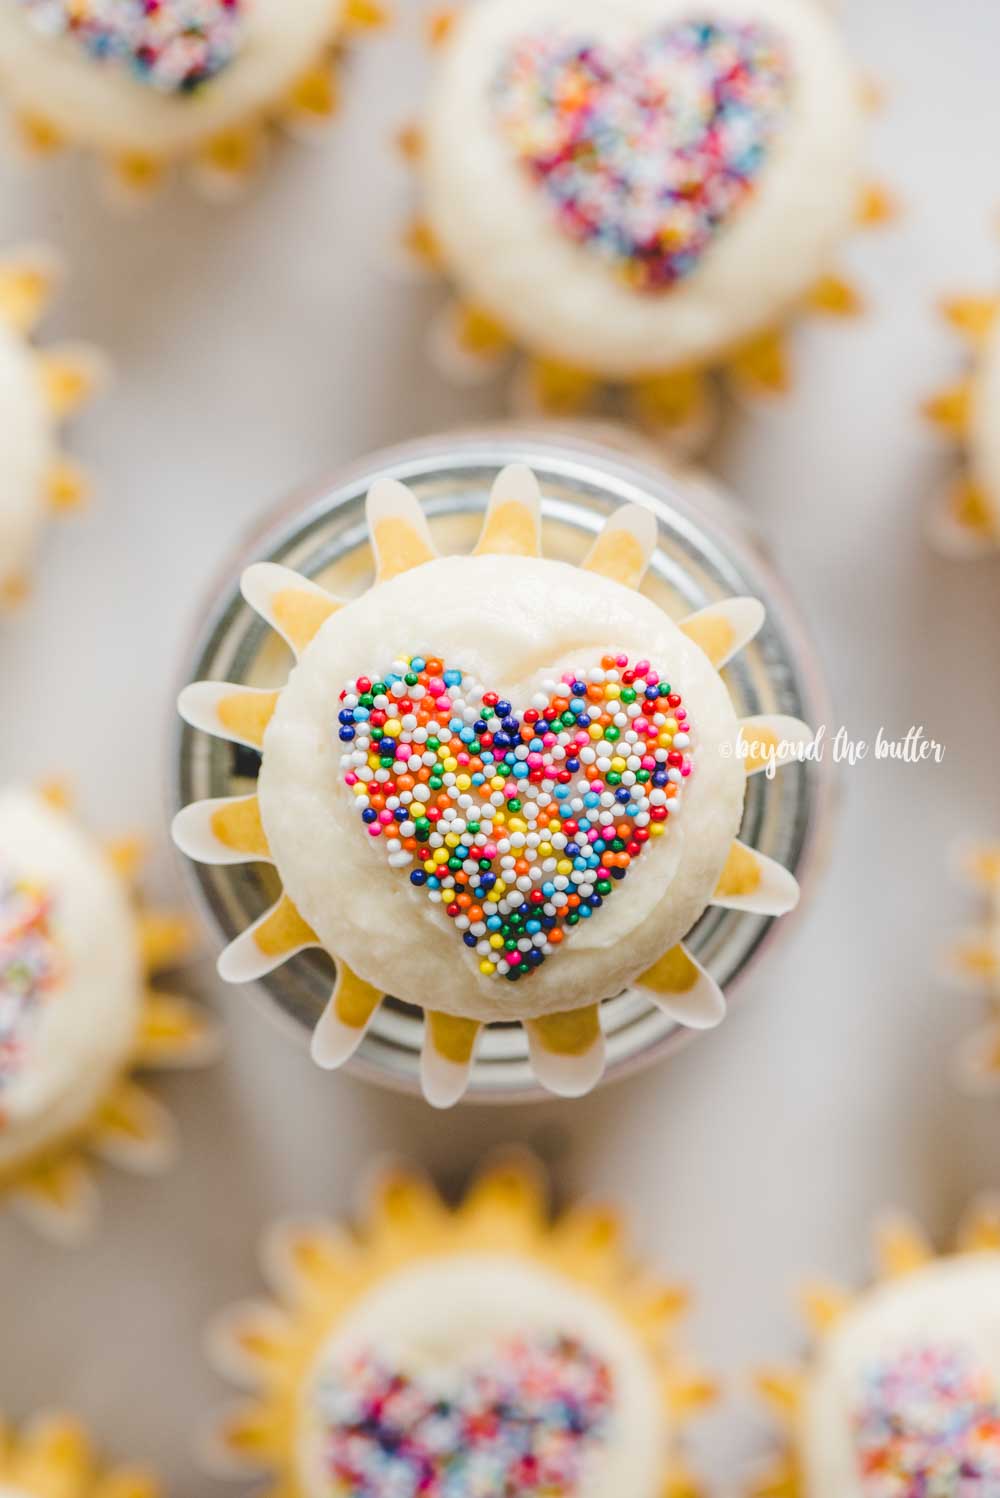 Overhead image of sprinkled heart cupcakes on white/grya background | All Images © Beyond the Butter™